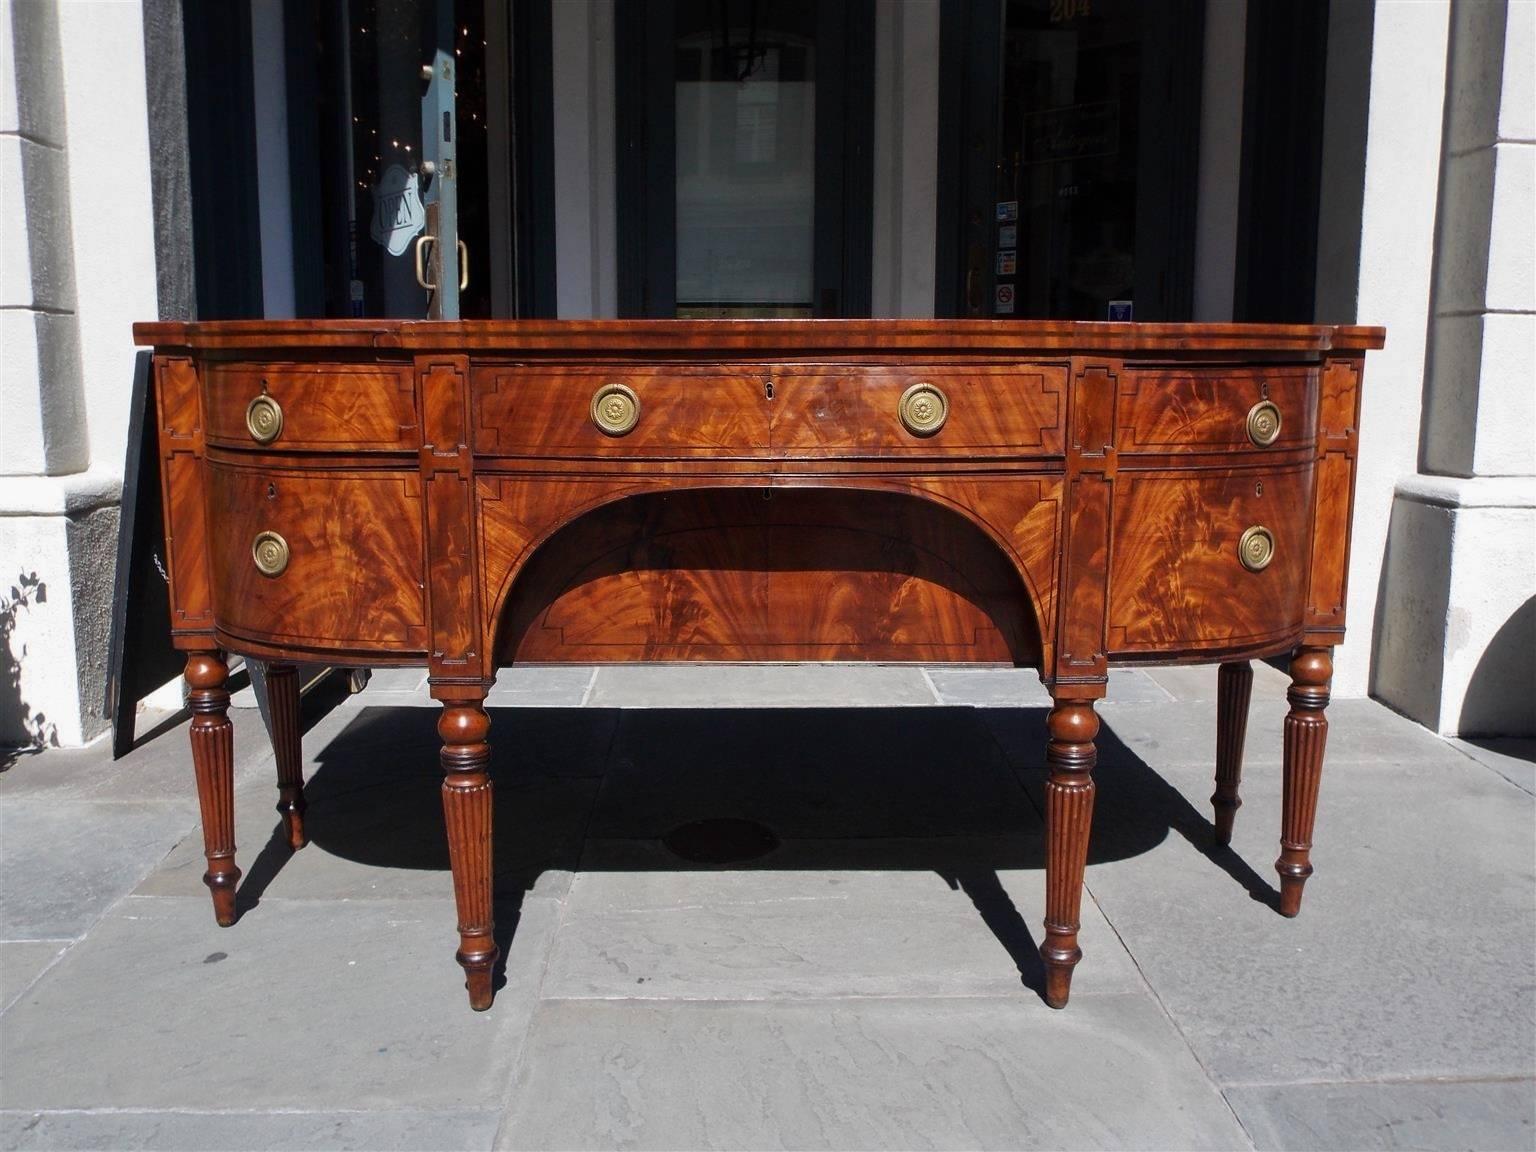 English Regency mahogany bow front sideboard with a upper case centered long drawer, flanked by a cutlery drawer and bottle box drawer, lower case arched centered silver drawer, flanked by a hinged side cupboard door, ebony string inlay drawer